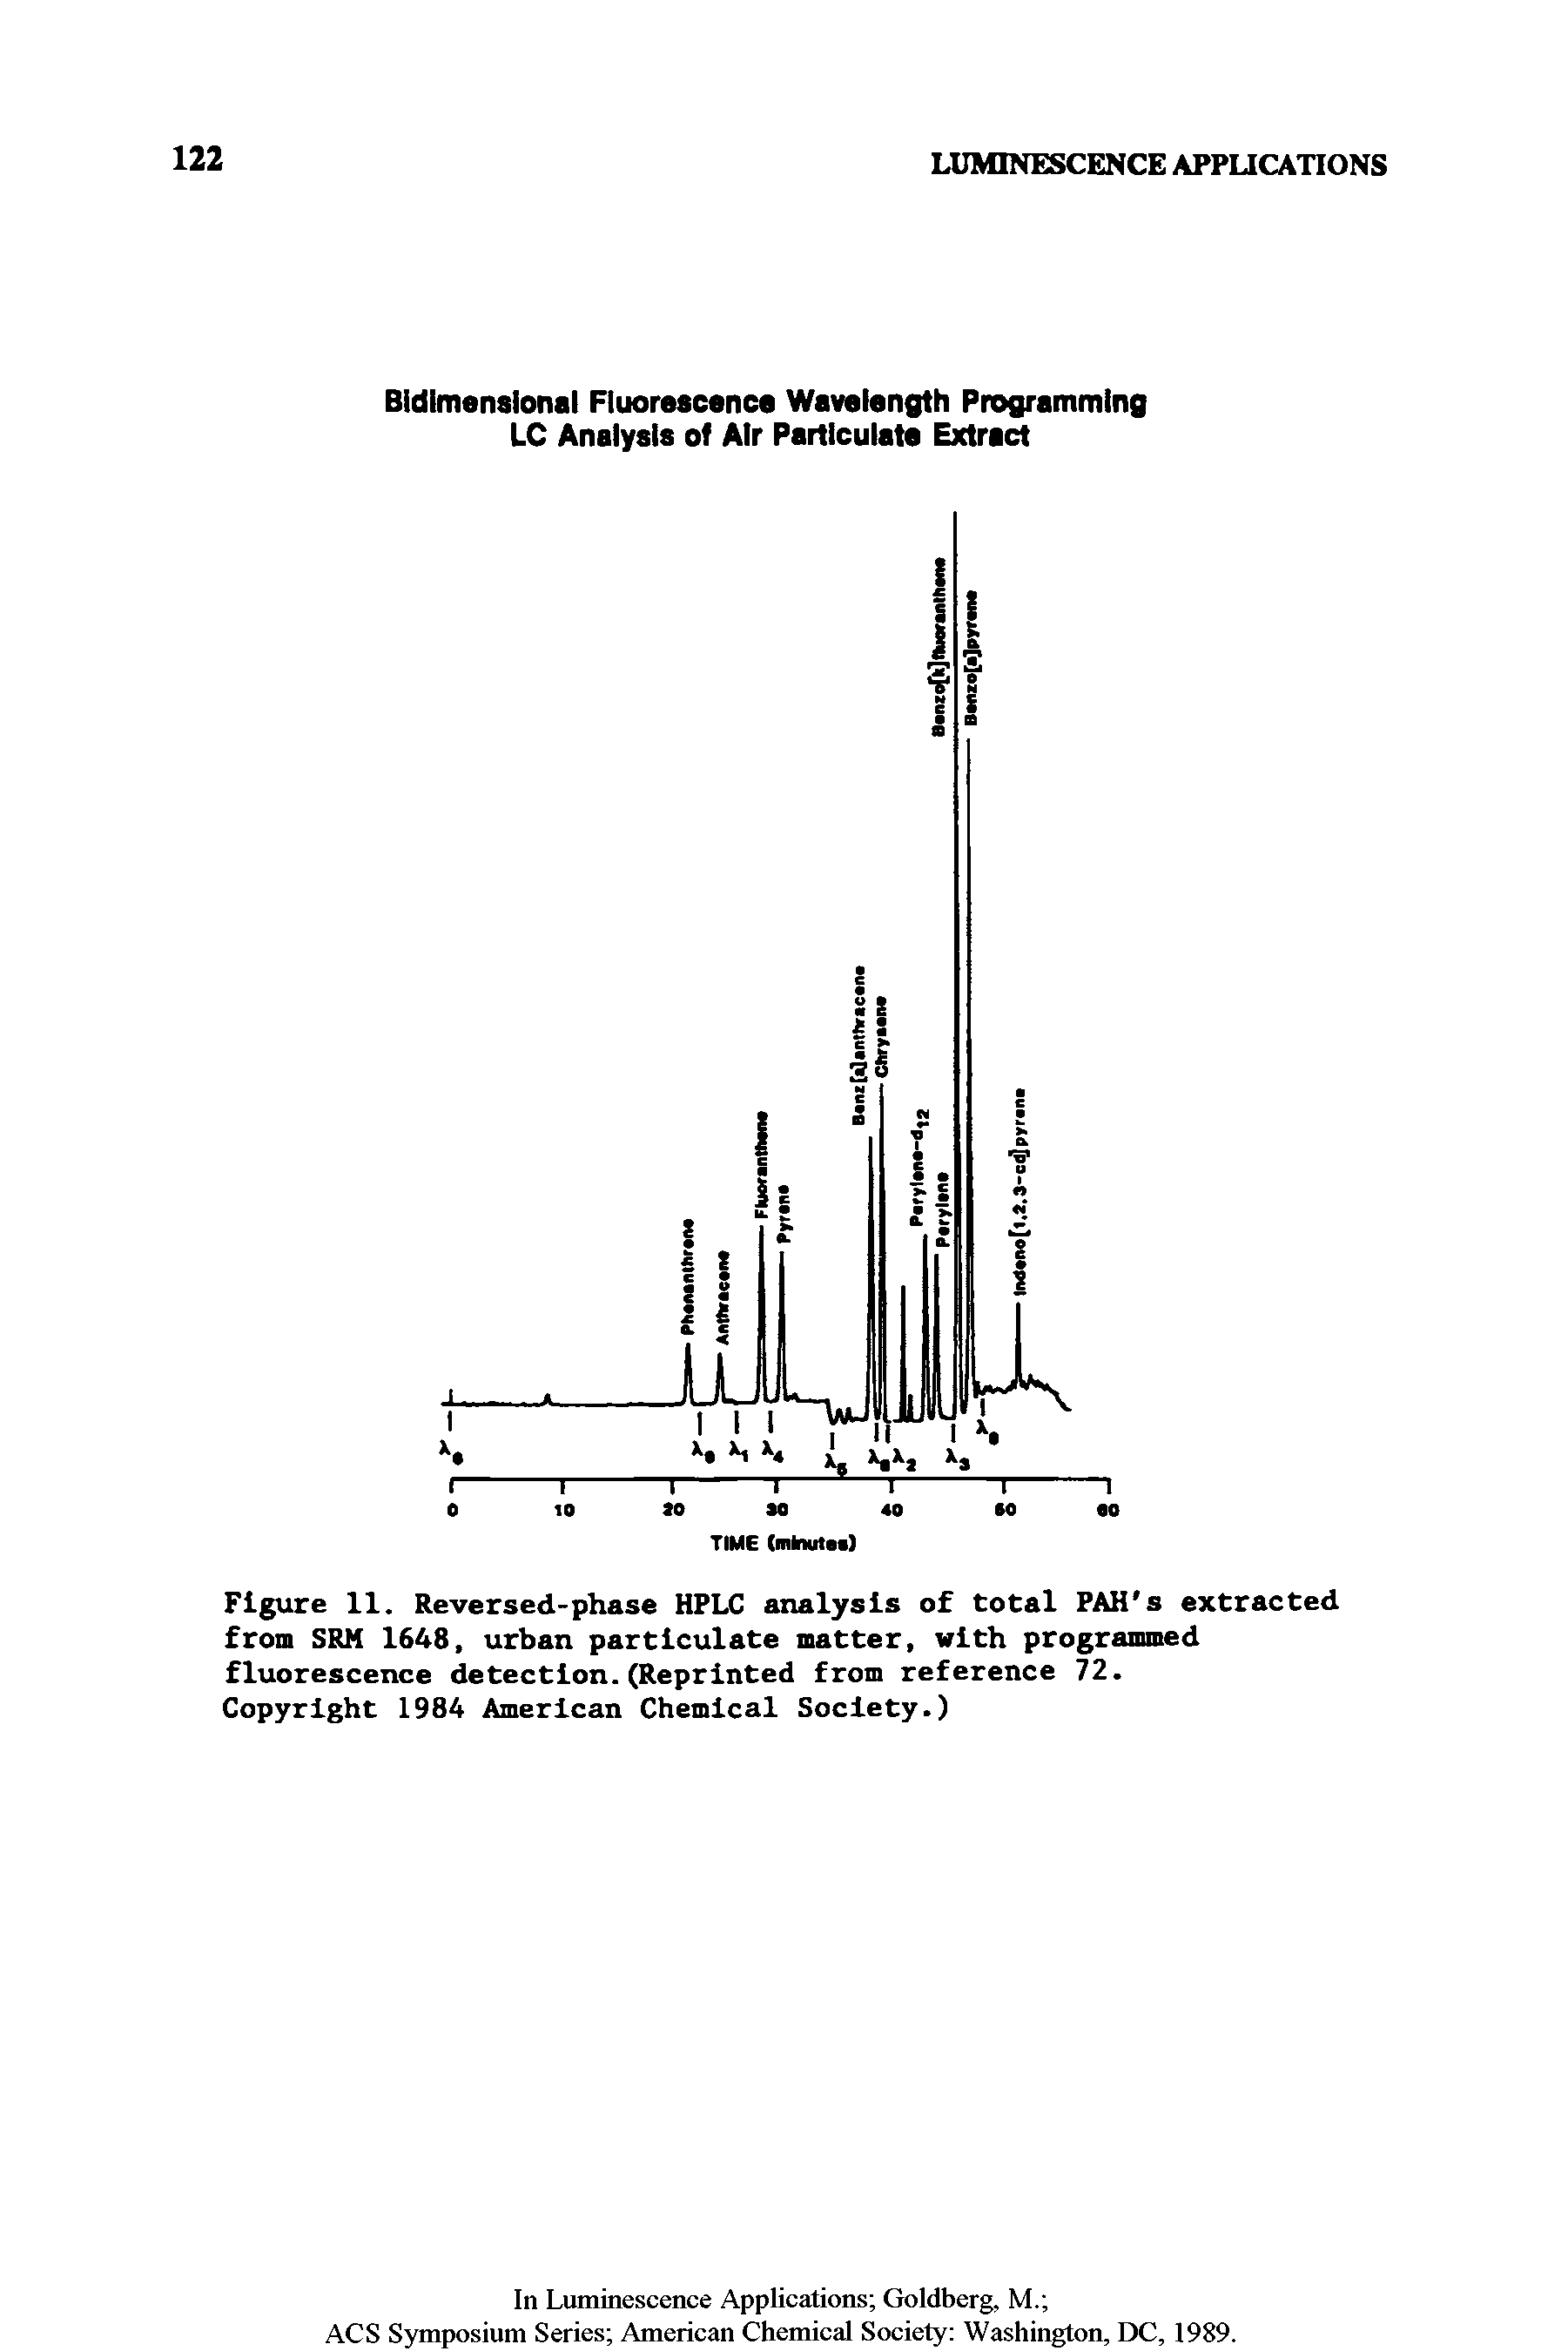 Figure 11. Reversed-phase HPLC analysis of total PAH s extracted from SRM 1648, urban particulate matter, with programmed fluorescence detection. (Reprinted from reference 72.